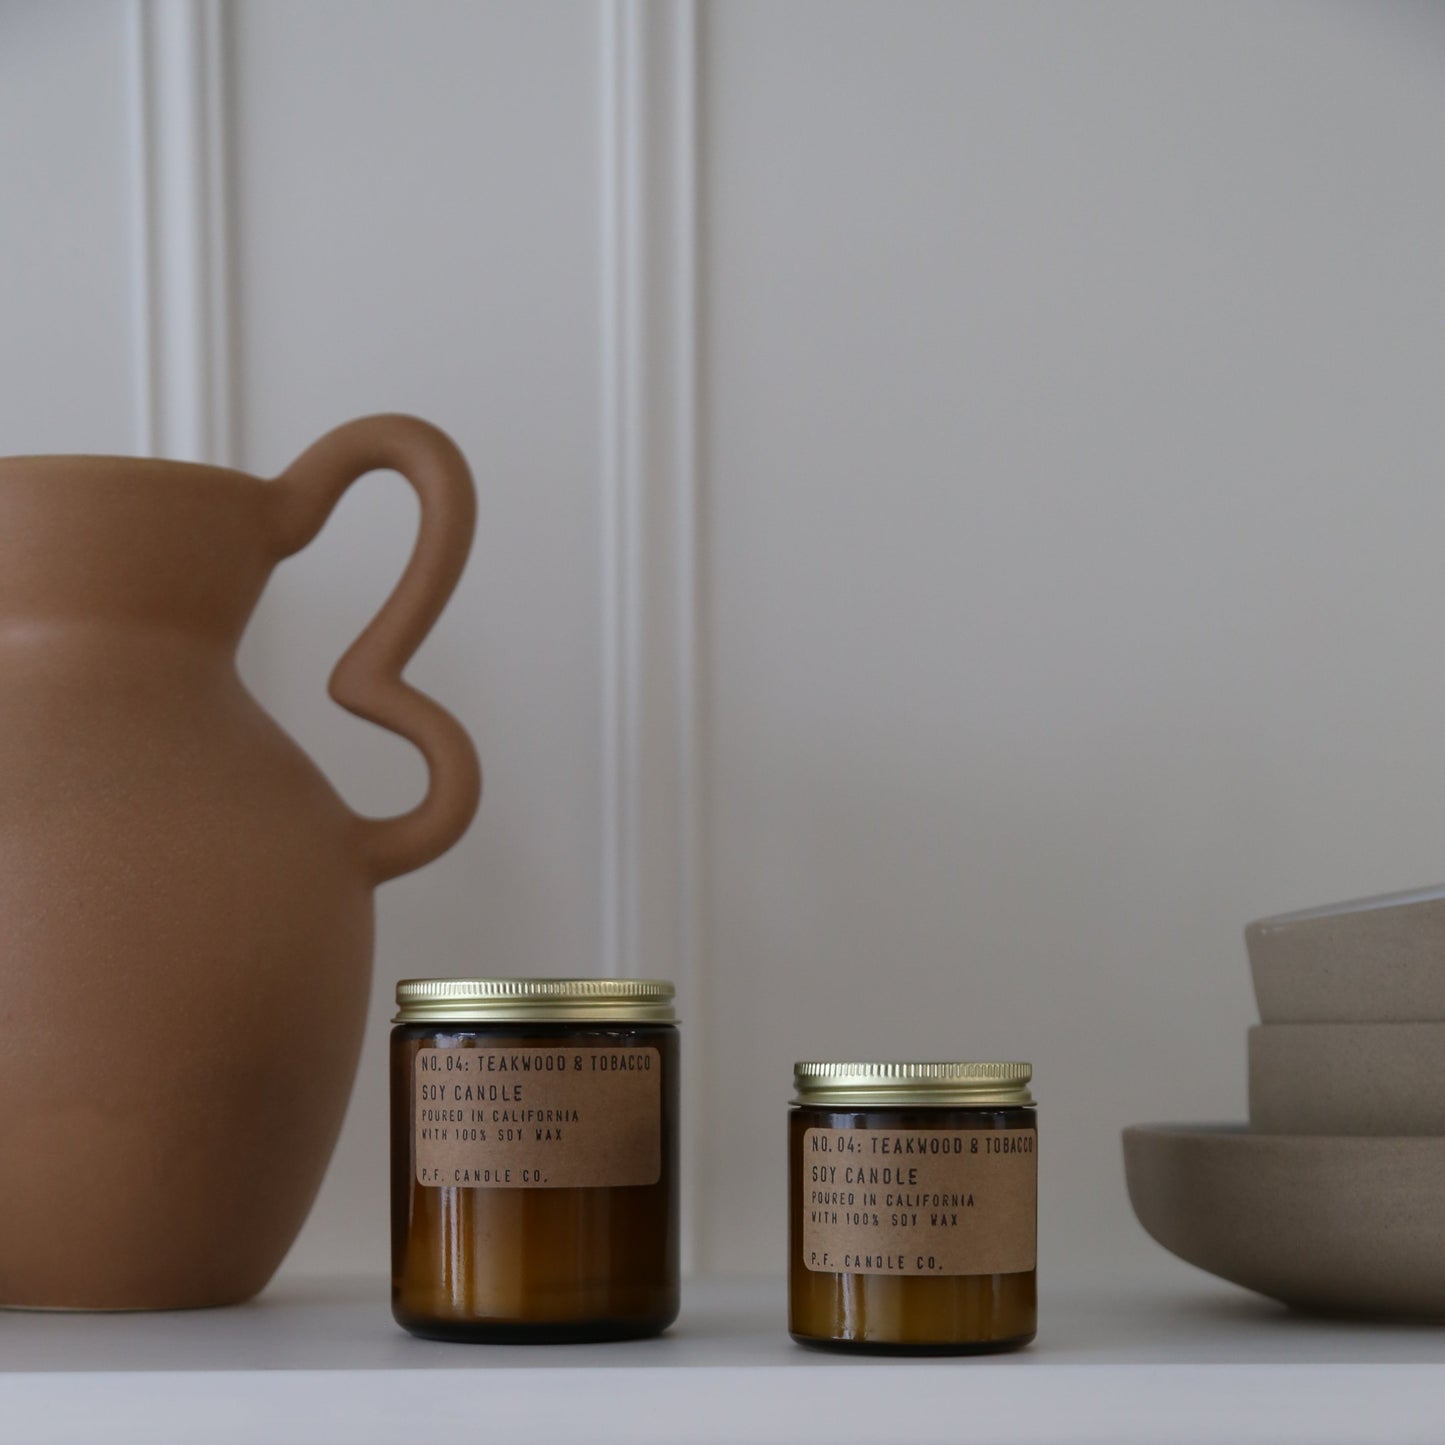 P.F. Candle Co mini teakwood and tobacco candle available at Rook & Rose.